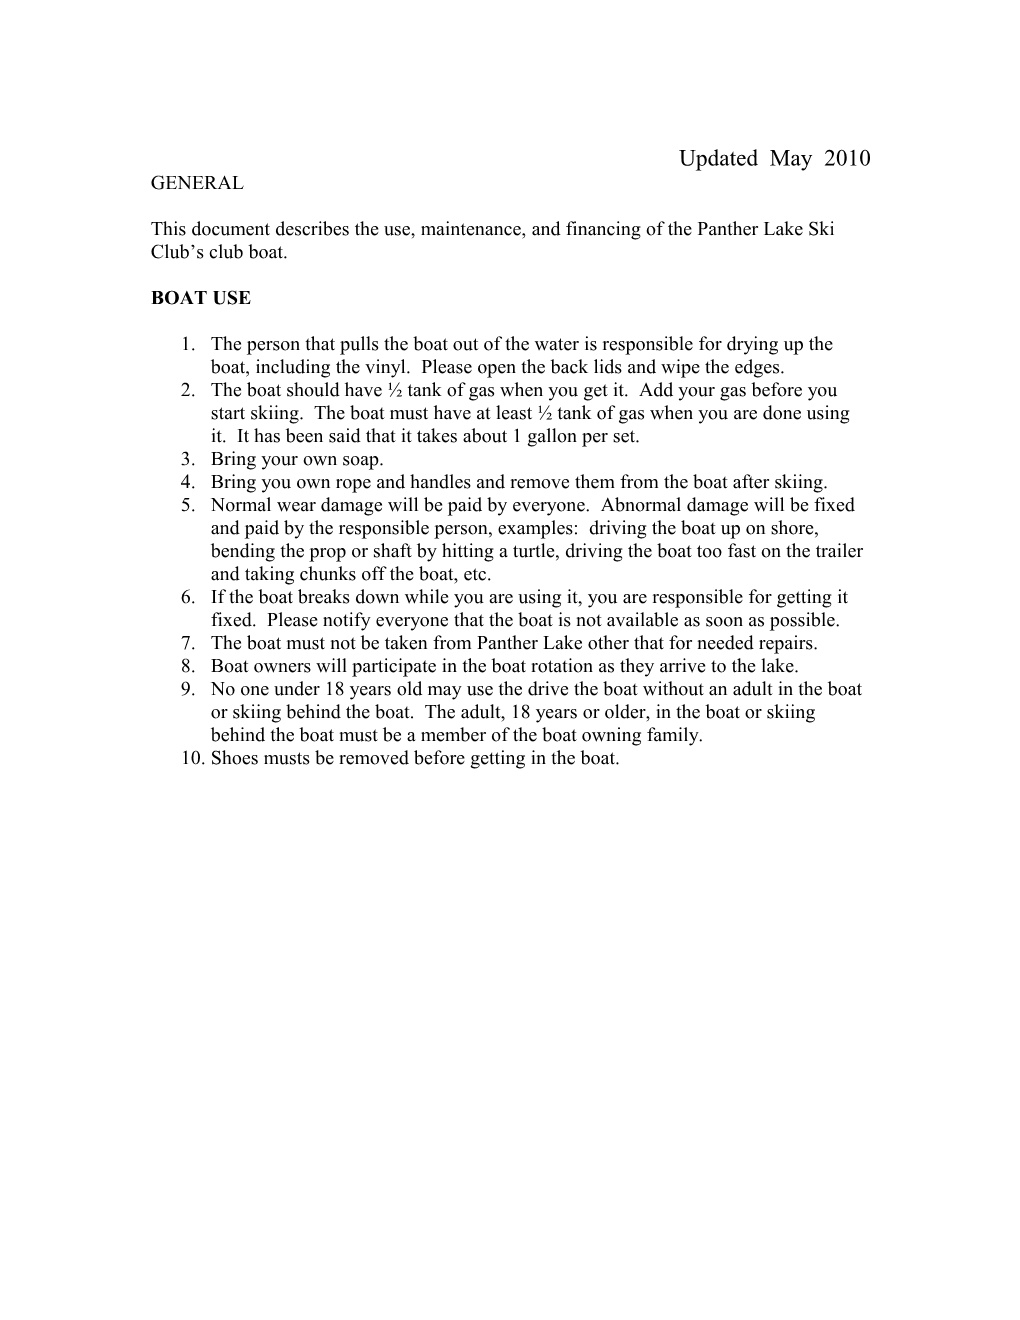 This Document Describes the Use, Maintenance, and Financing of the Panther Lake Ski Club